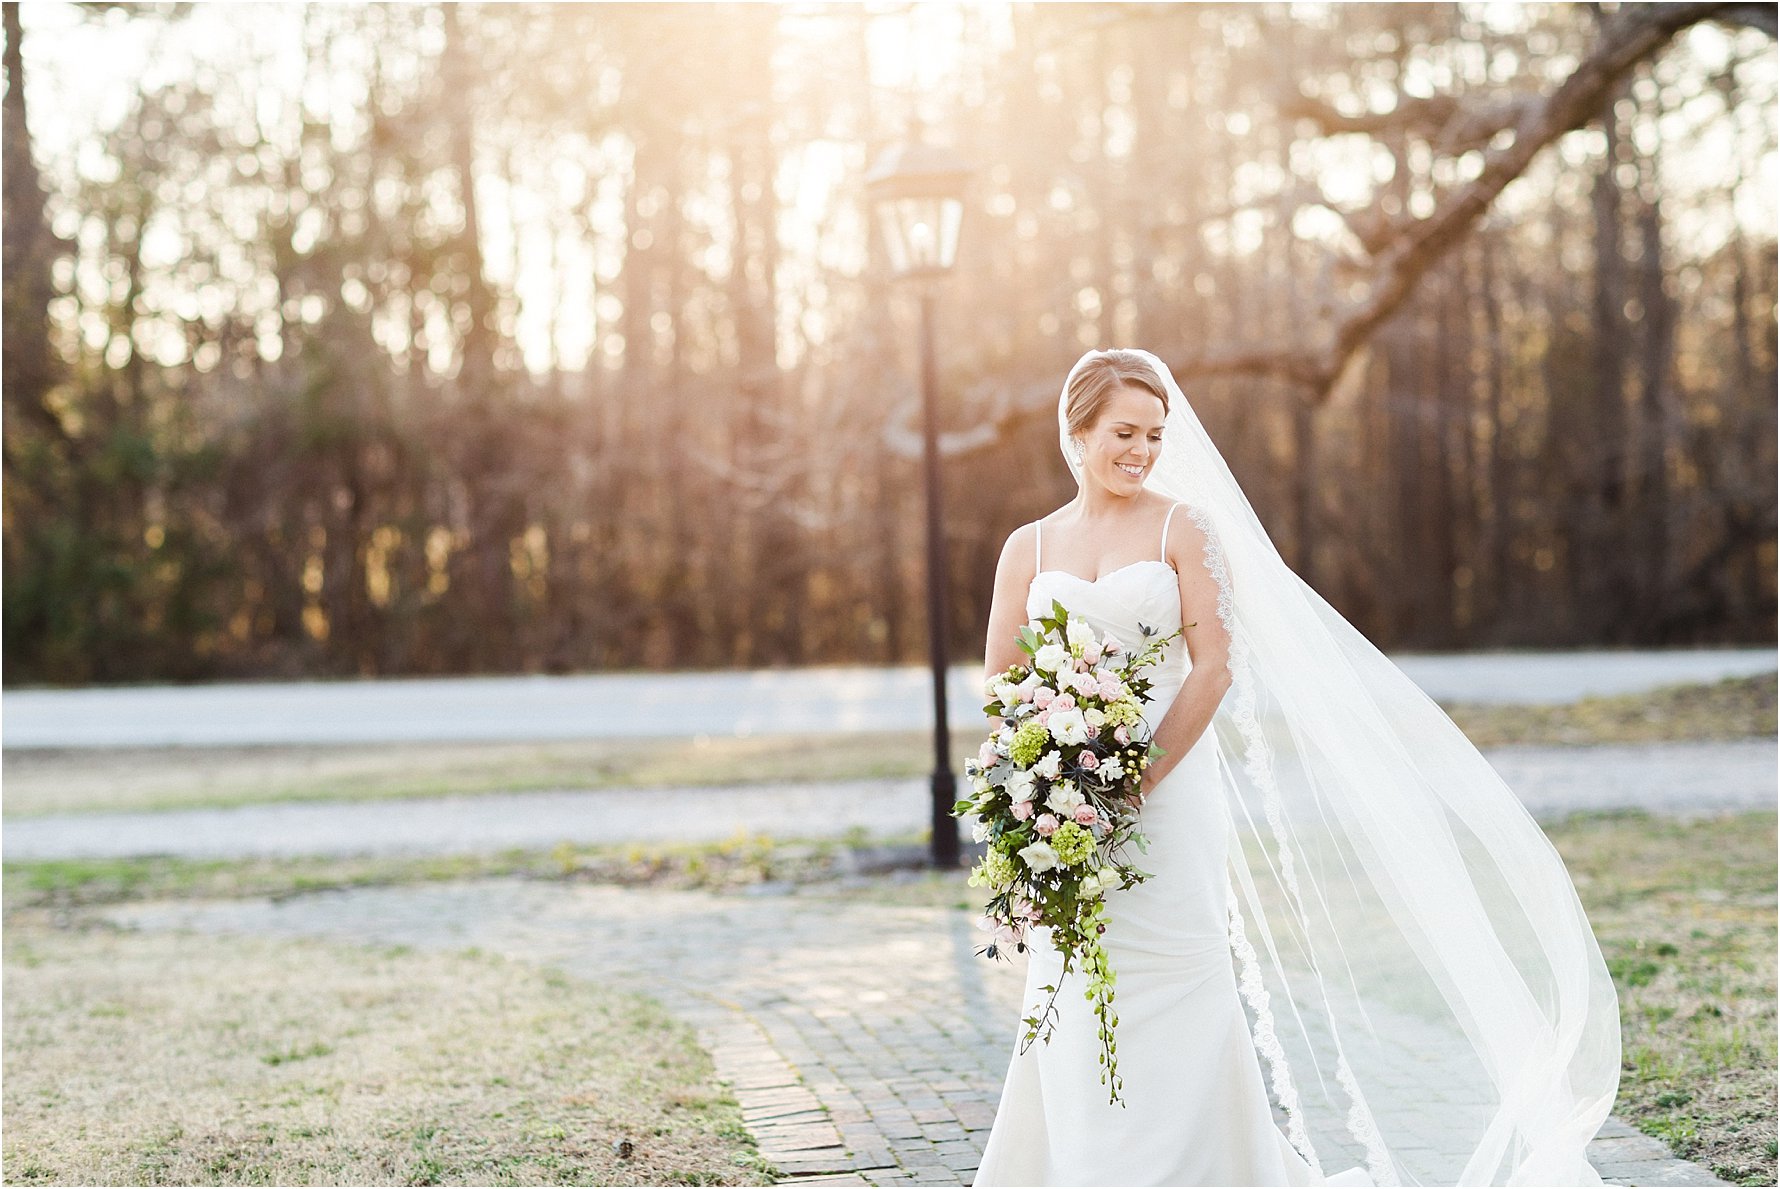 Classic Cathedral Veil Bridal Portraits in NC